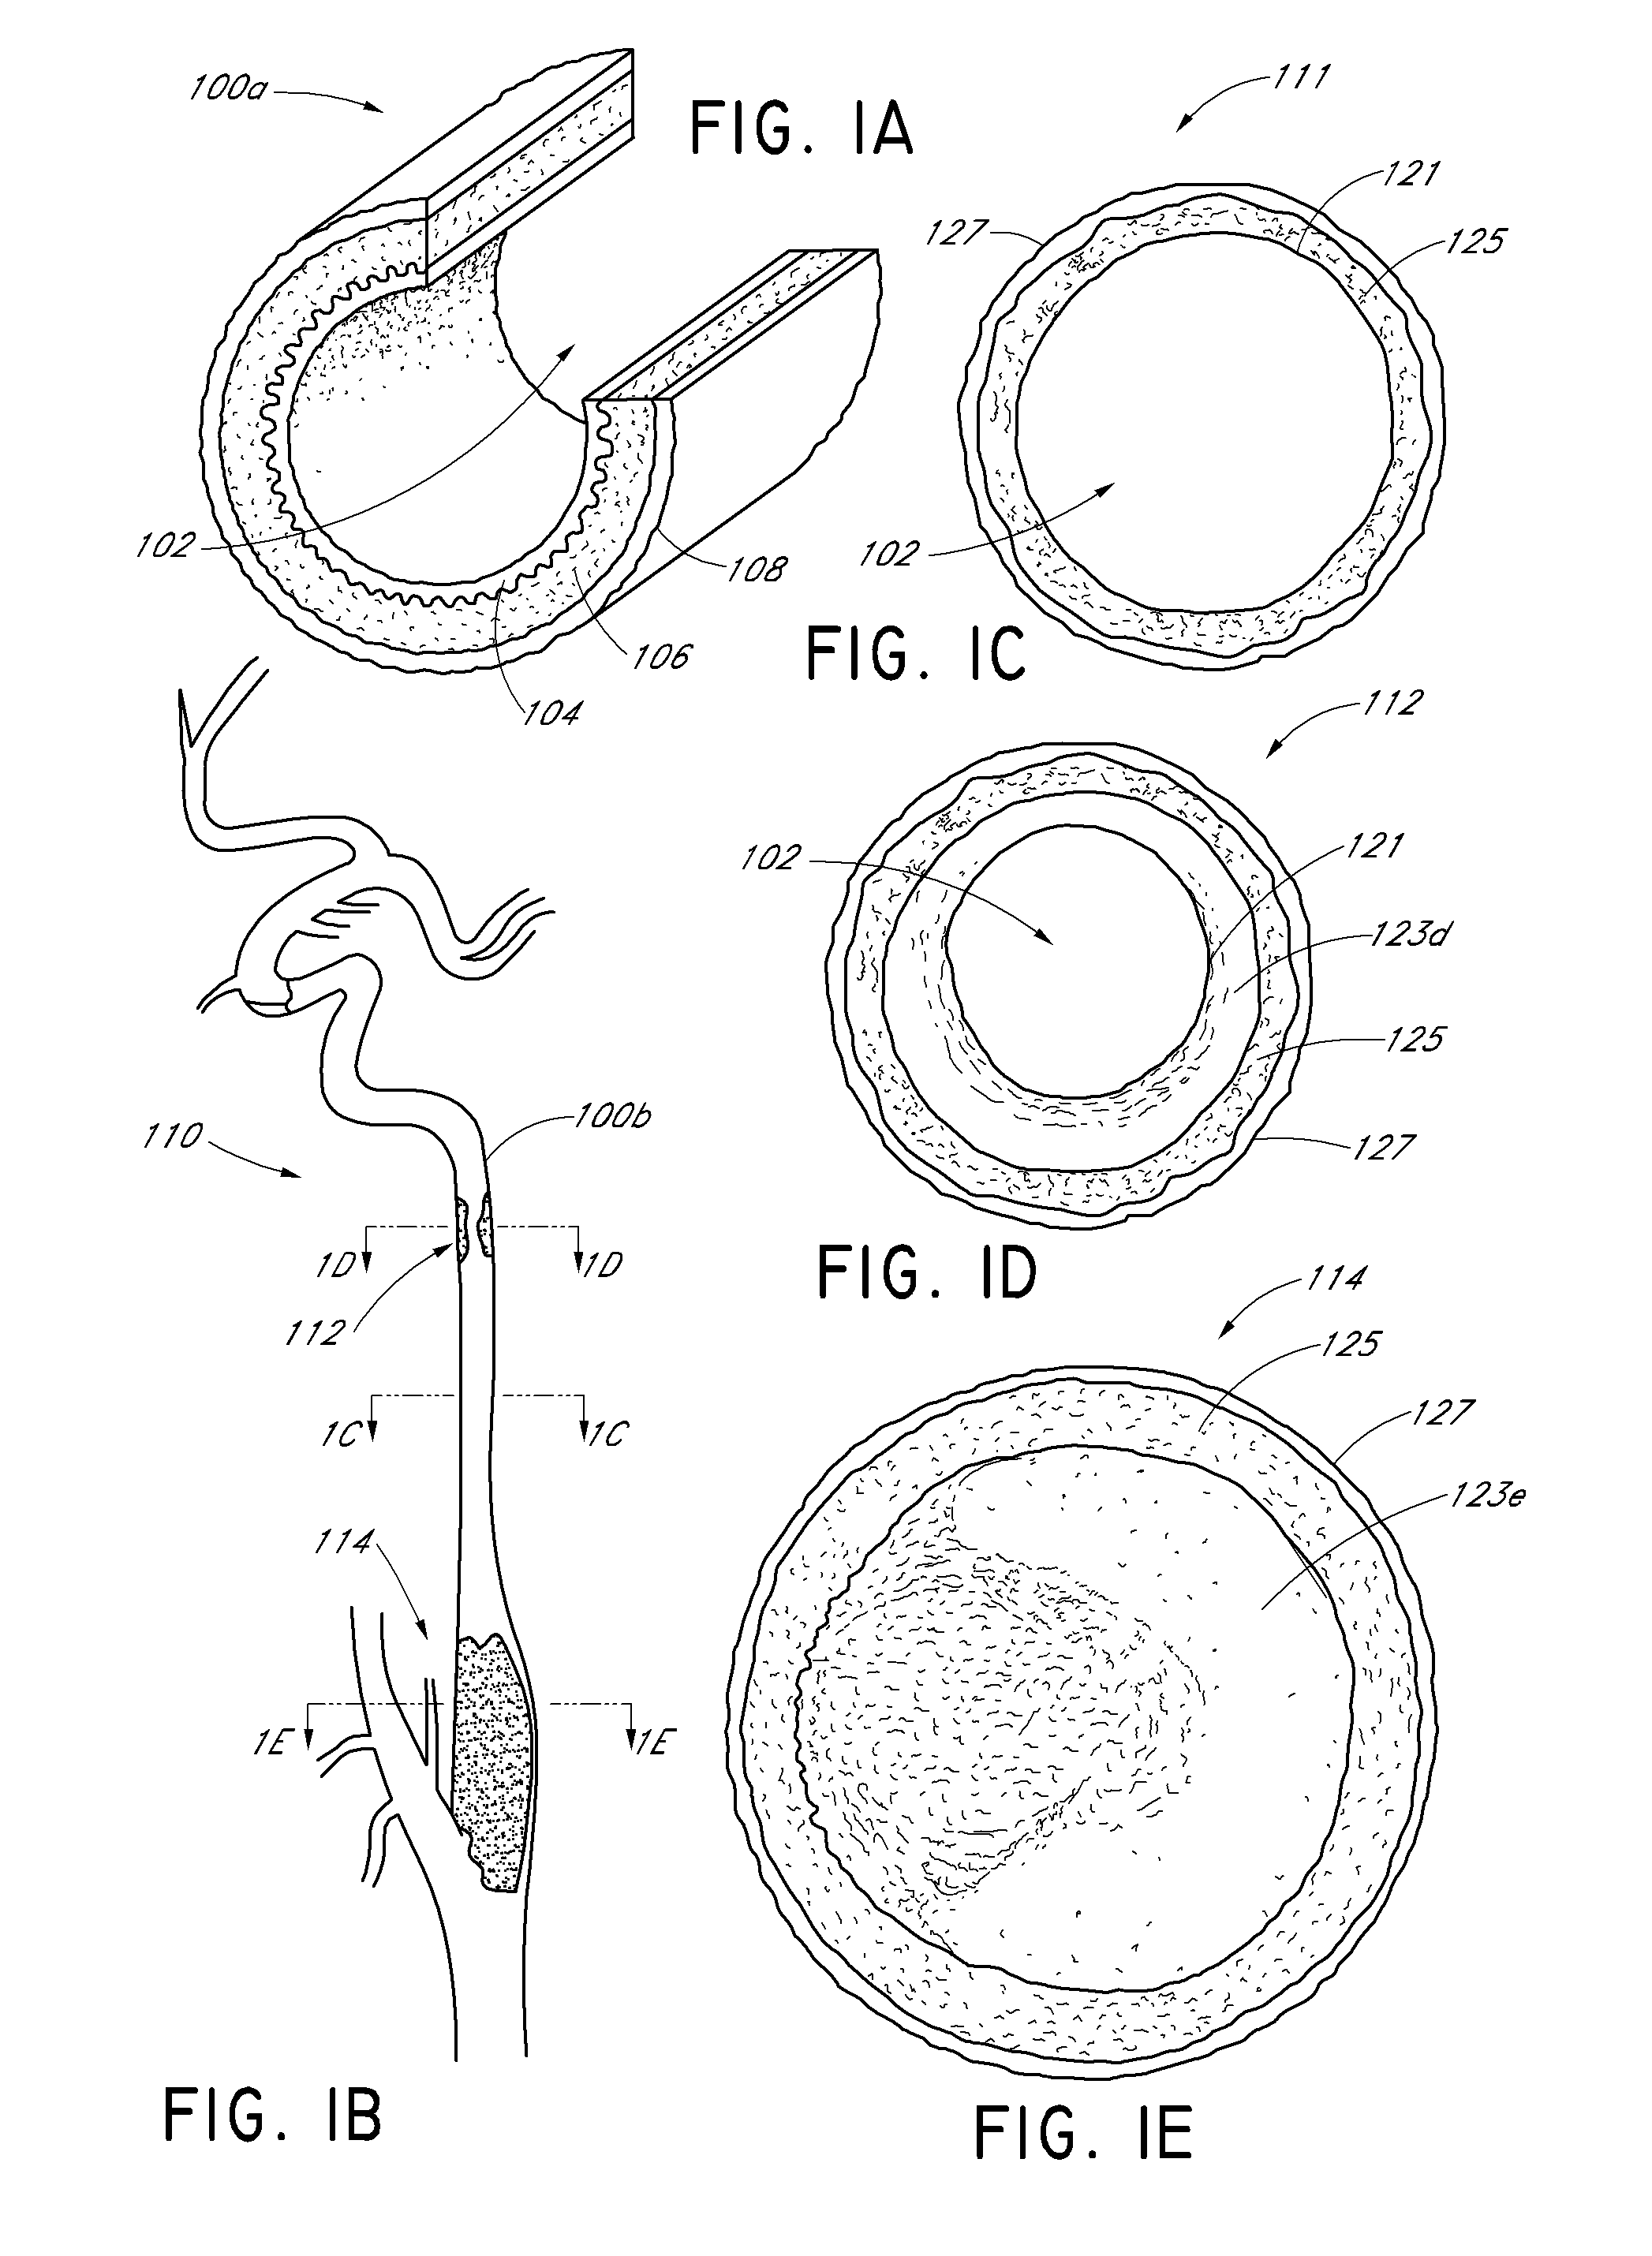 Vascular plaque removal systems, devices, and methods